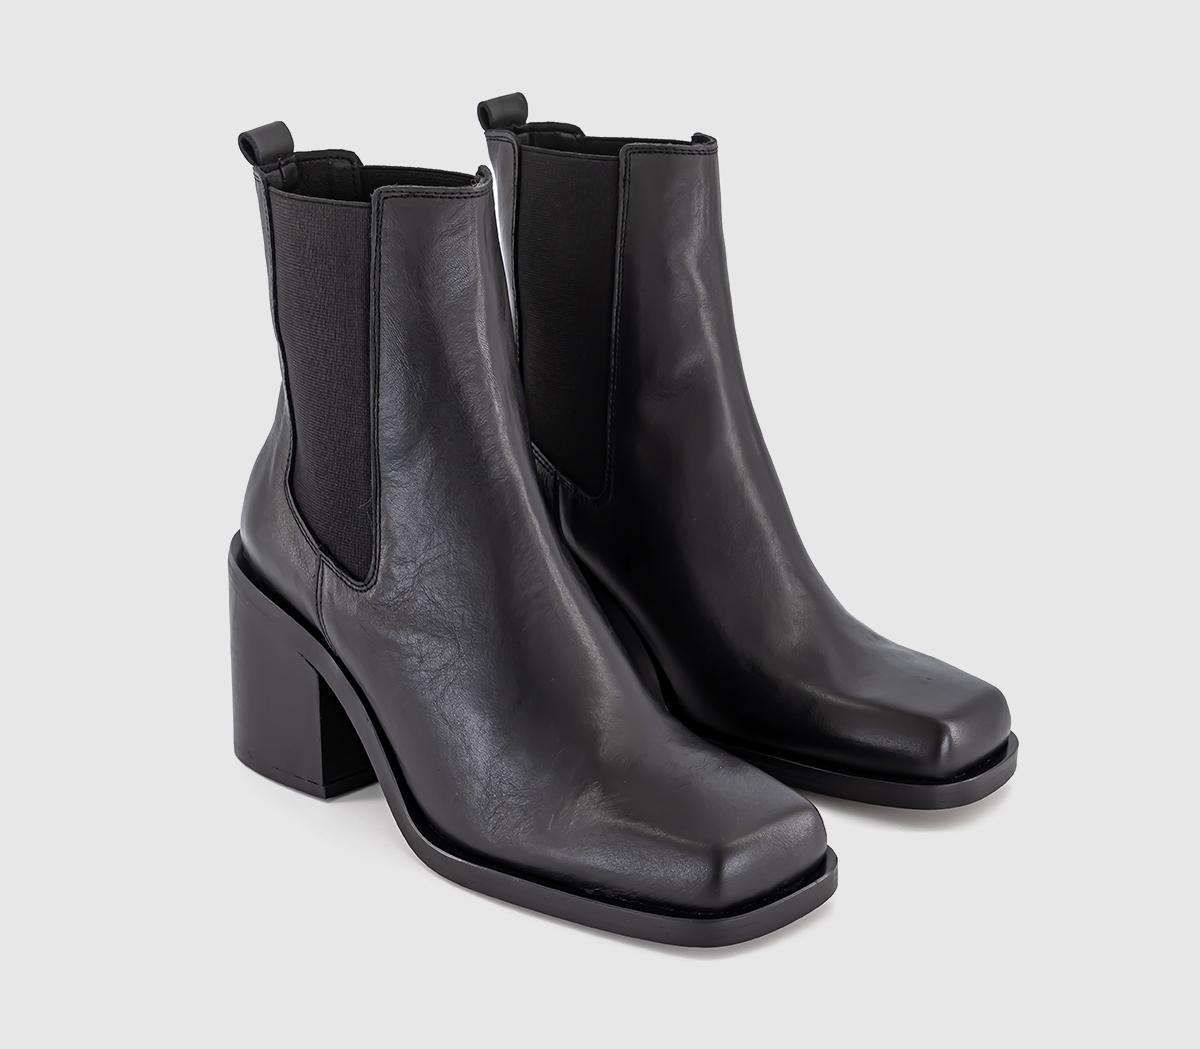 OFFICE Alice Square Toe Heeled Chelsea Boots Black Leather - Women's ...